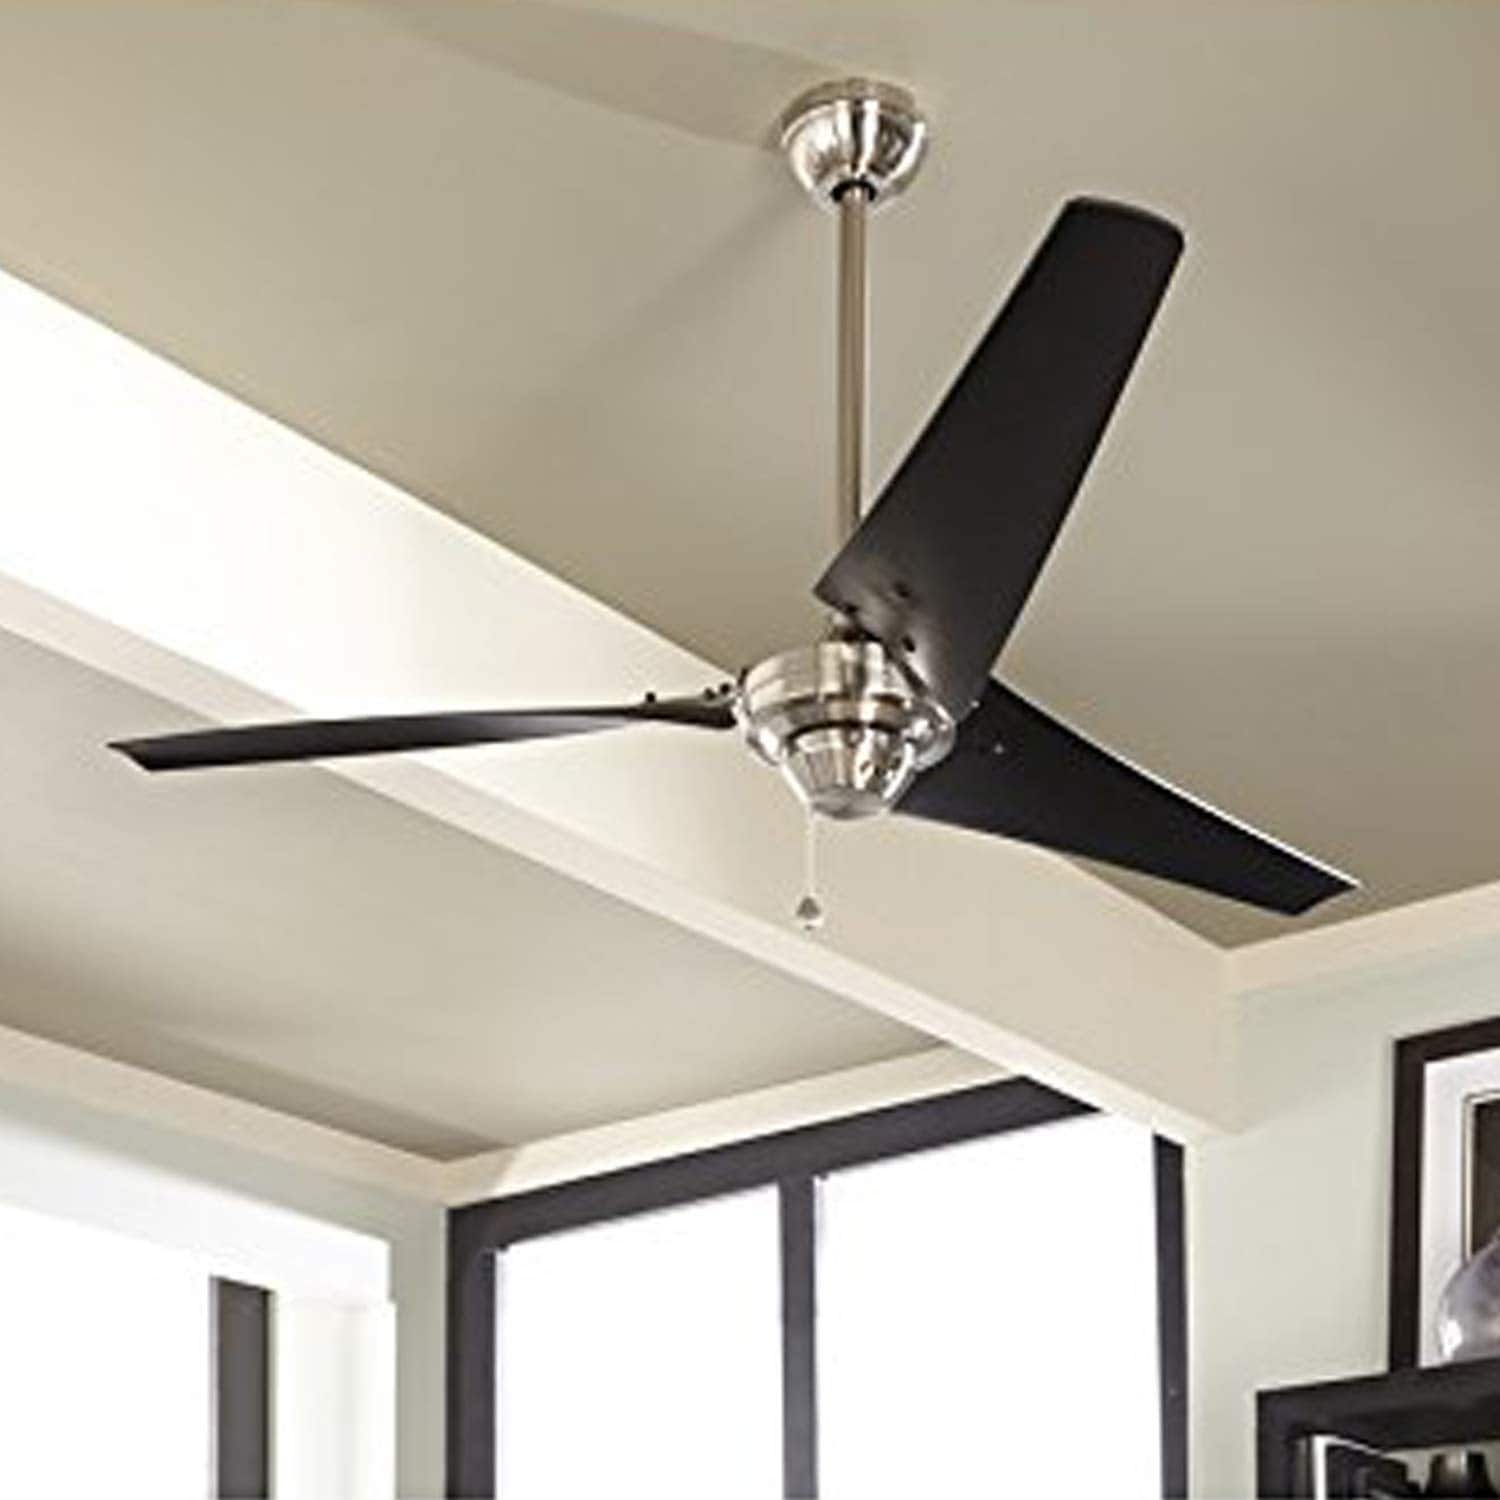 Almadale Ceiling Fan With Energy Efficient Blades Brushed Nickel 56 Inch